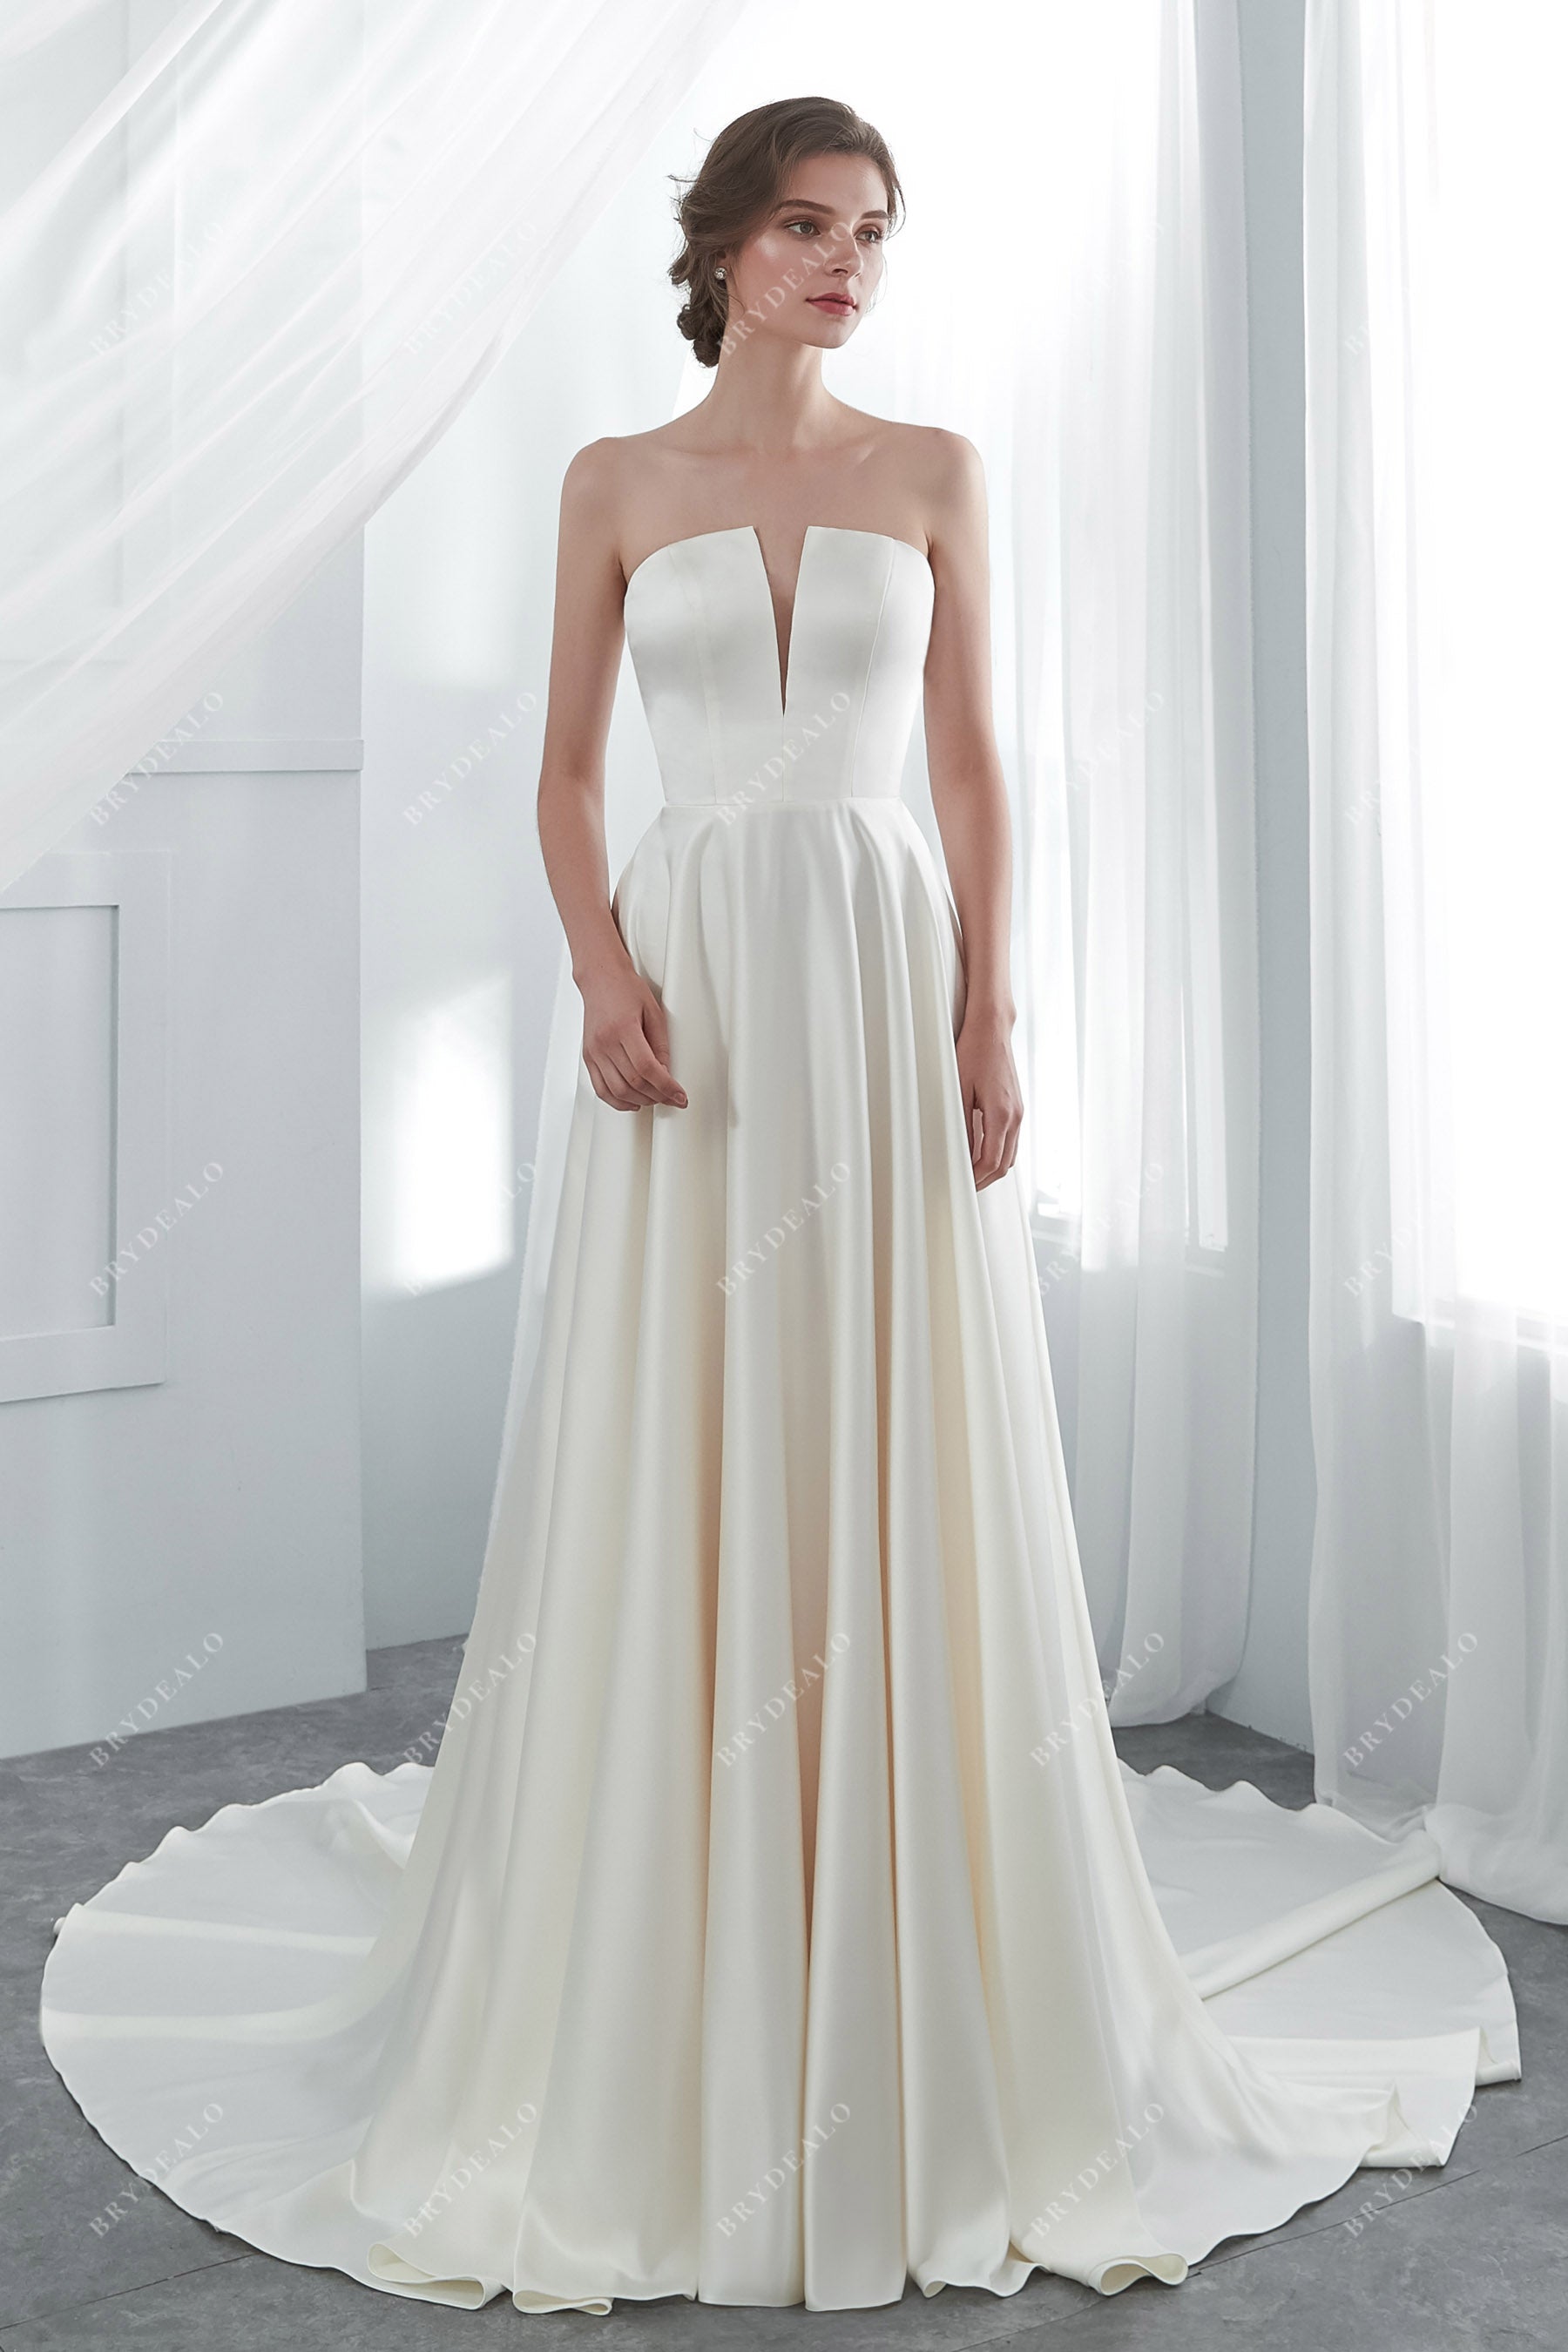 Satin Classic A-line Strapless Bridal Gown